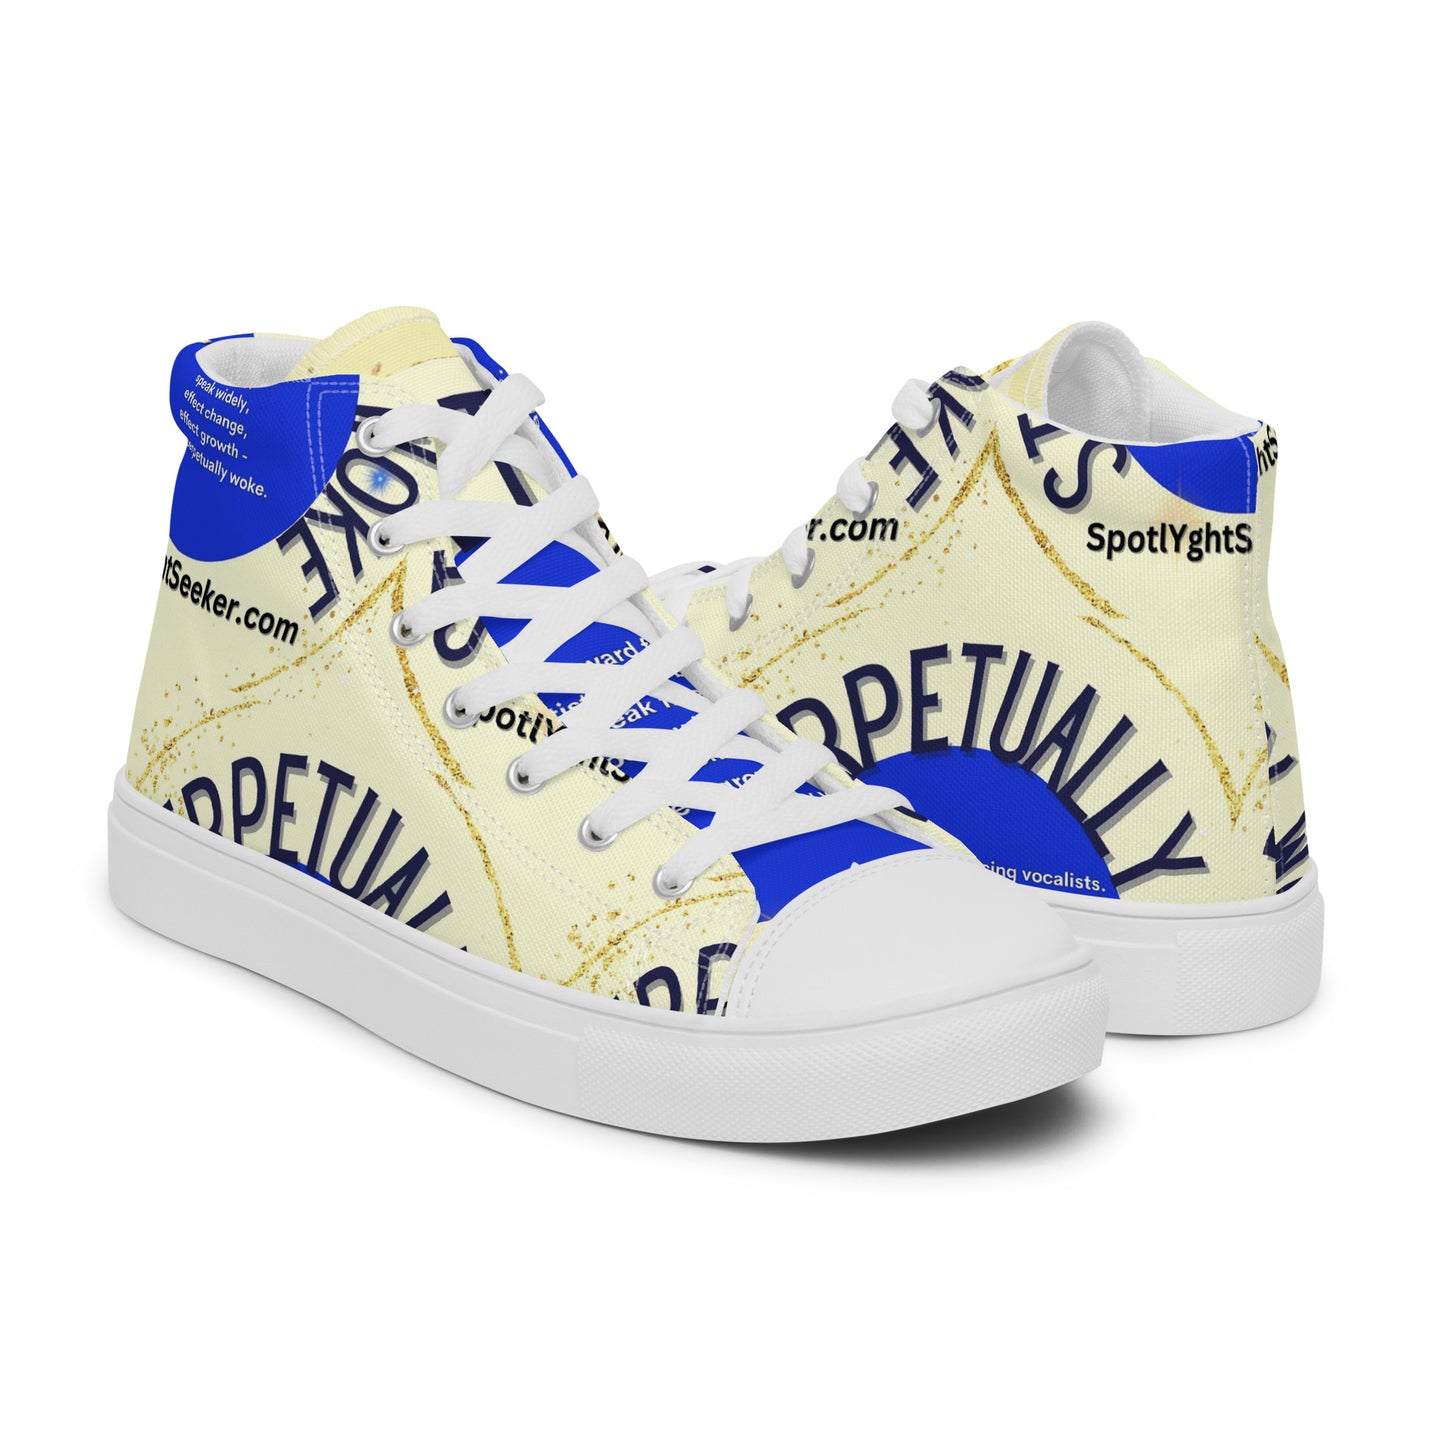 Perpetually Woke Artist High Top Canvas Shoes statement piece for male artists who seek the spotlight